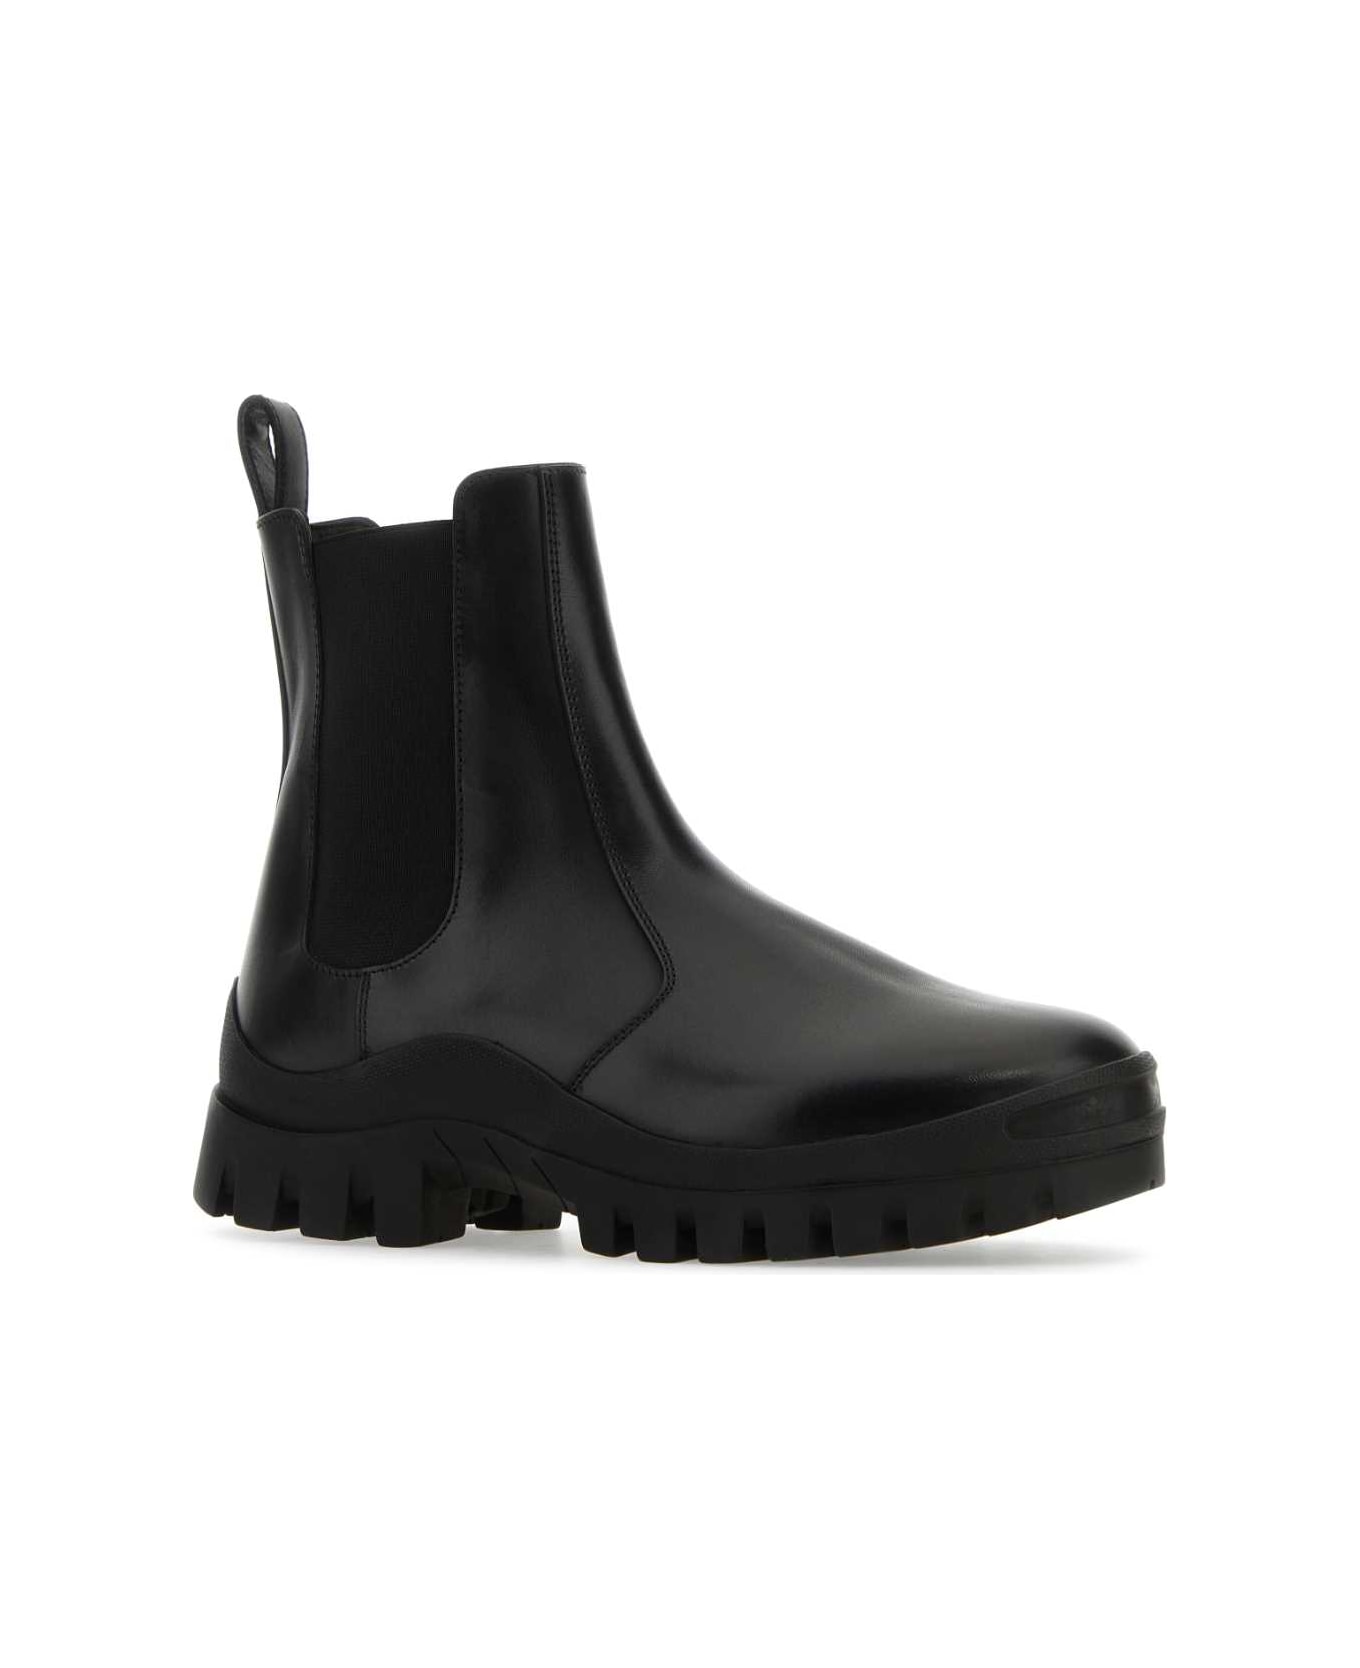 The Row Black Leather Greta Winter Ankle Boots - Black ブーツ